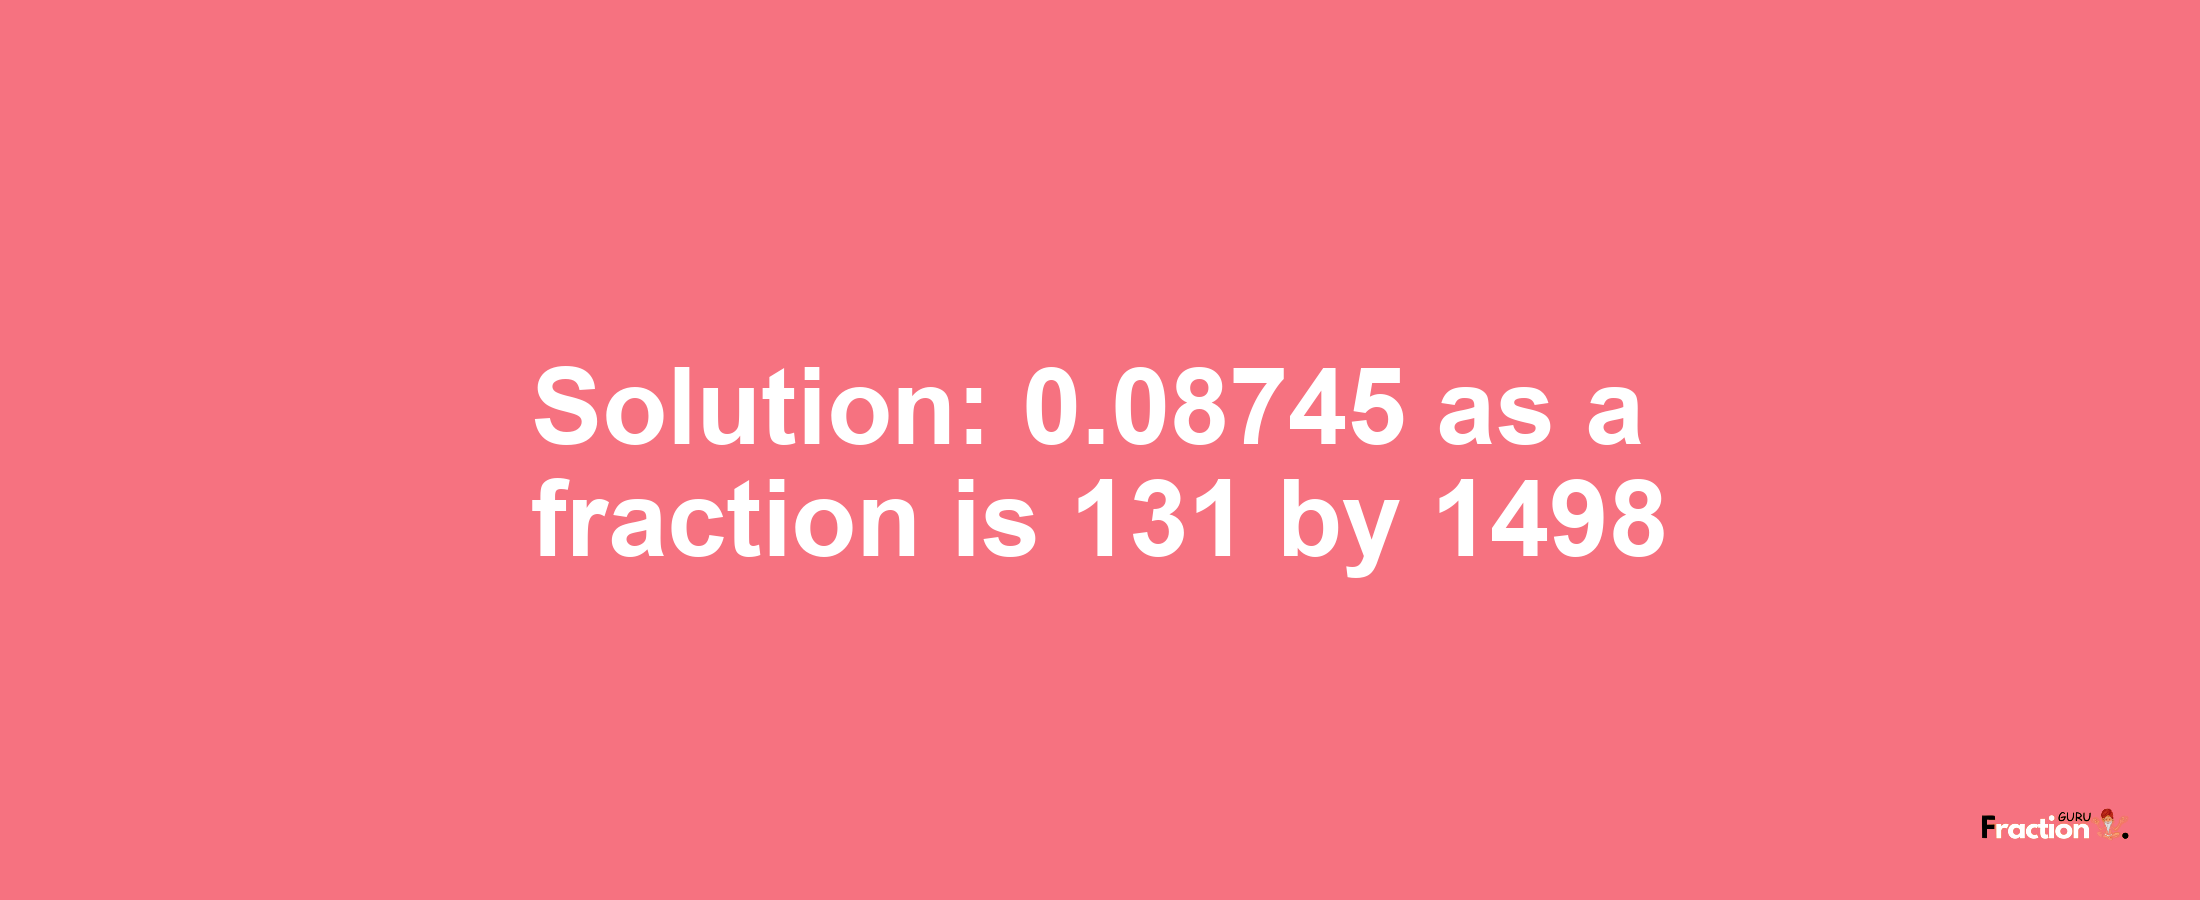 Solution:0.08745 as a fraction is 131/1498